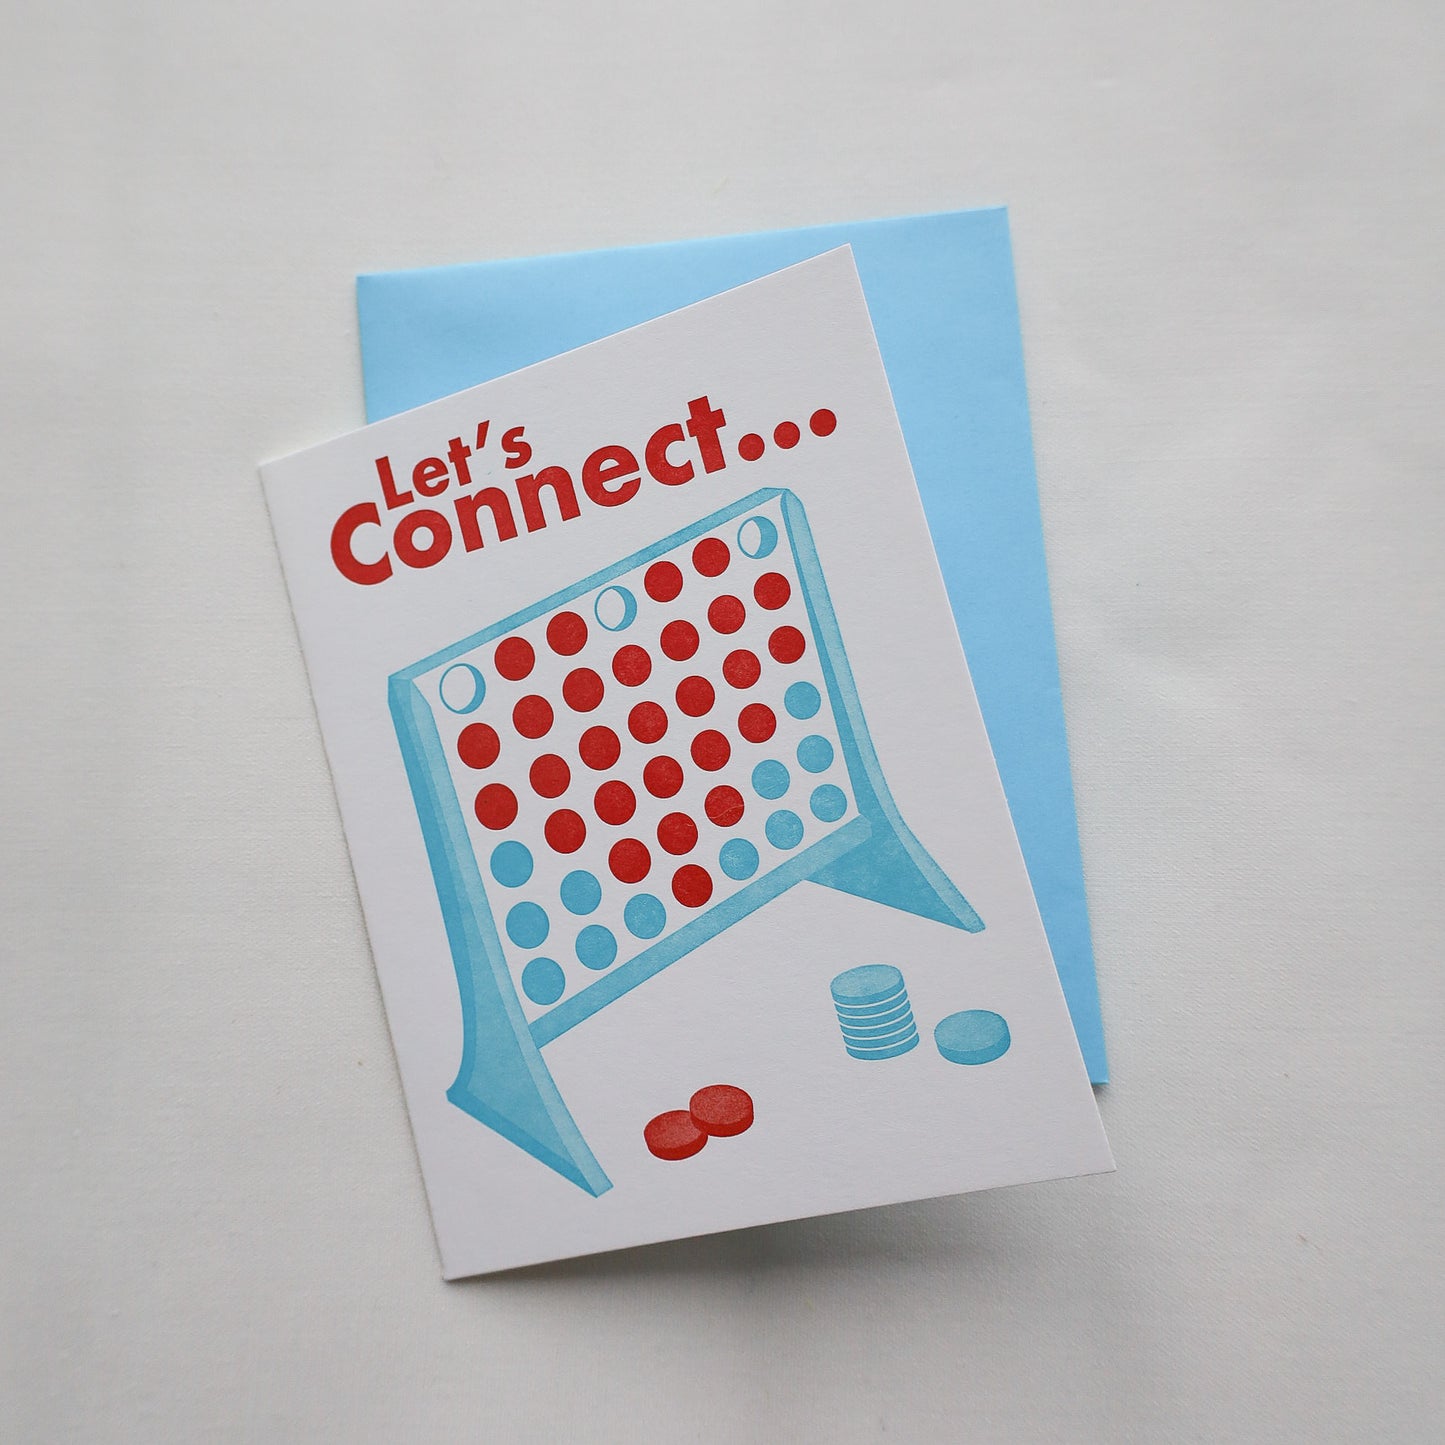 Let's Connect Greeting Card - Curated Home Decor